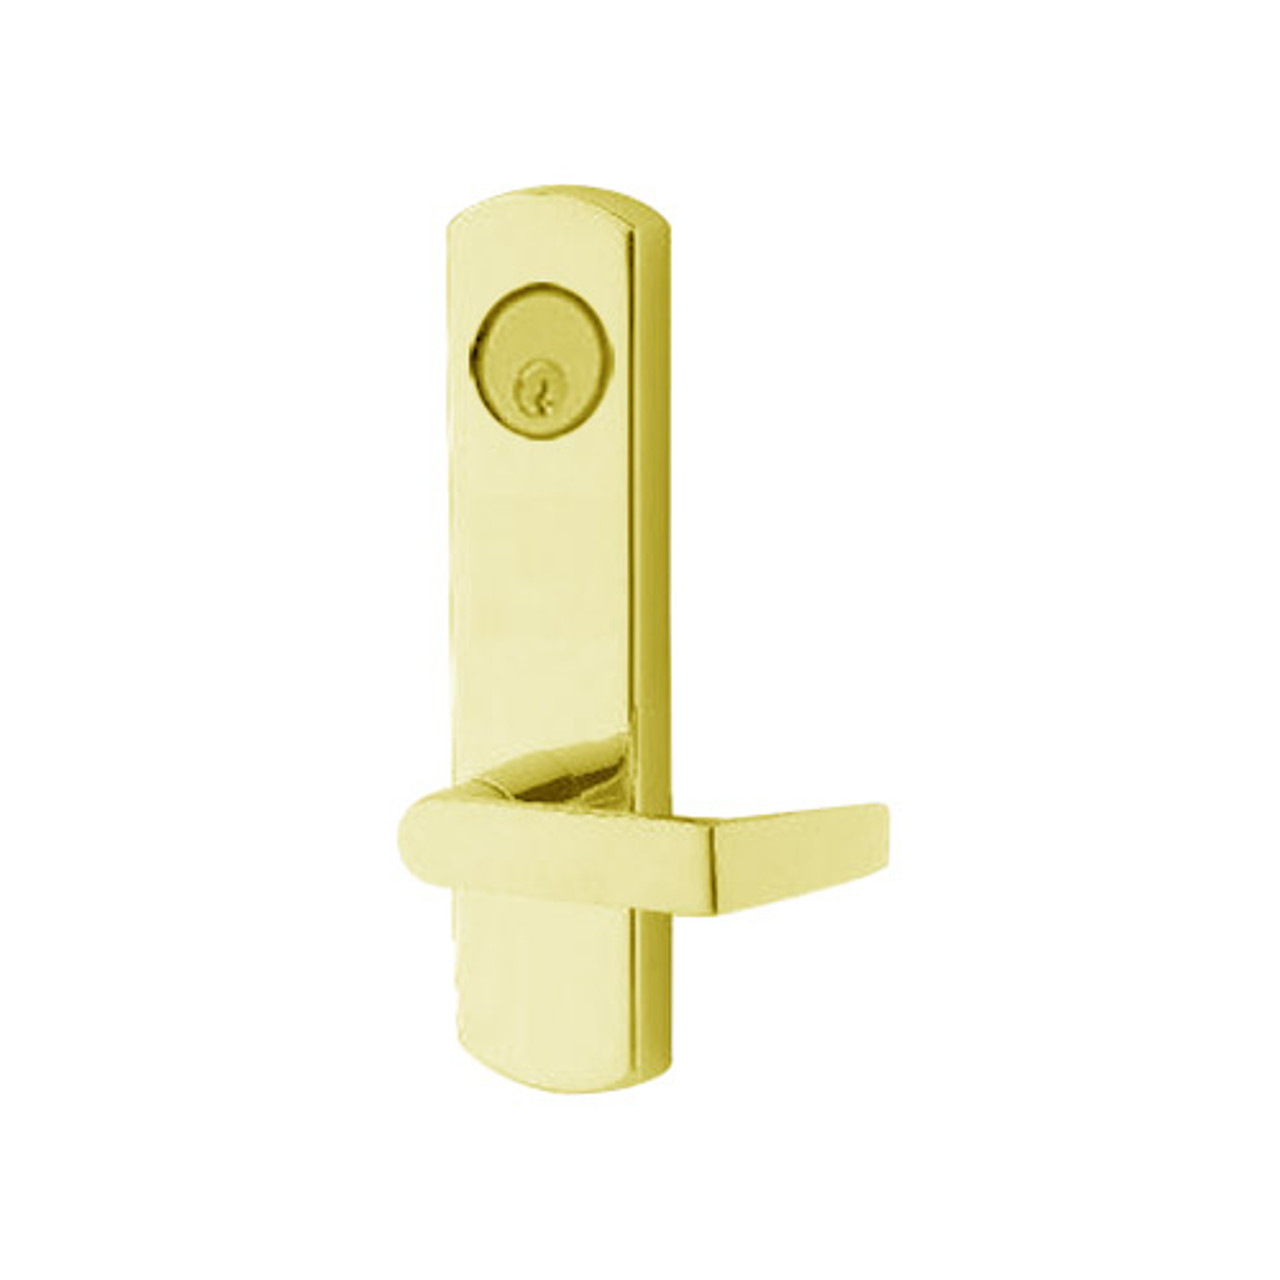 3080E-03-0-34-35 US3 Adams Rite Electrified Entry Trim with Square Lever in Bright Brass Finish